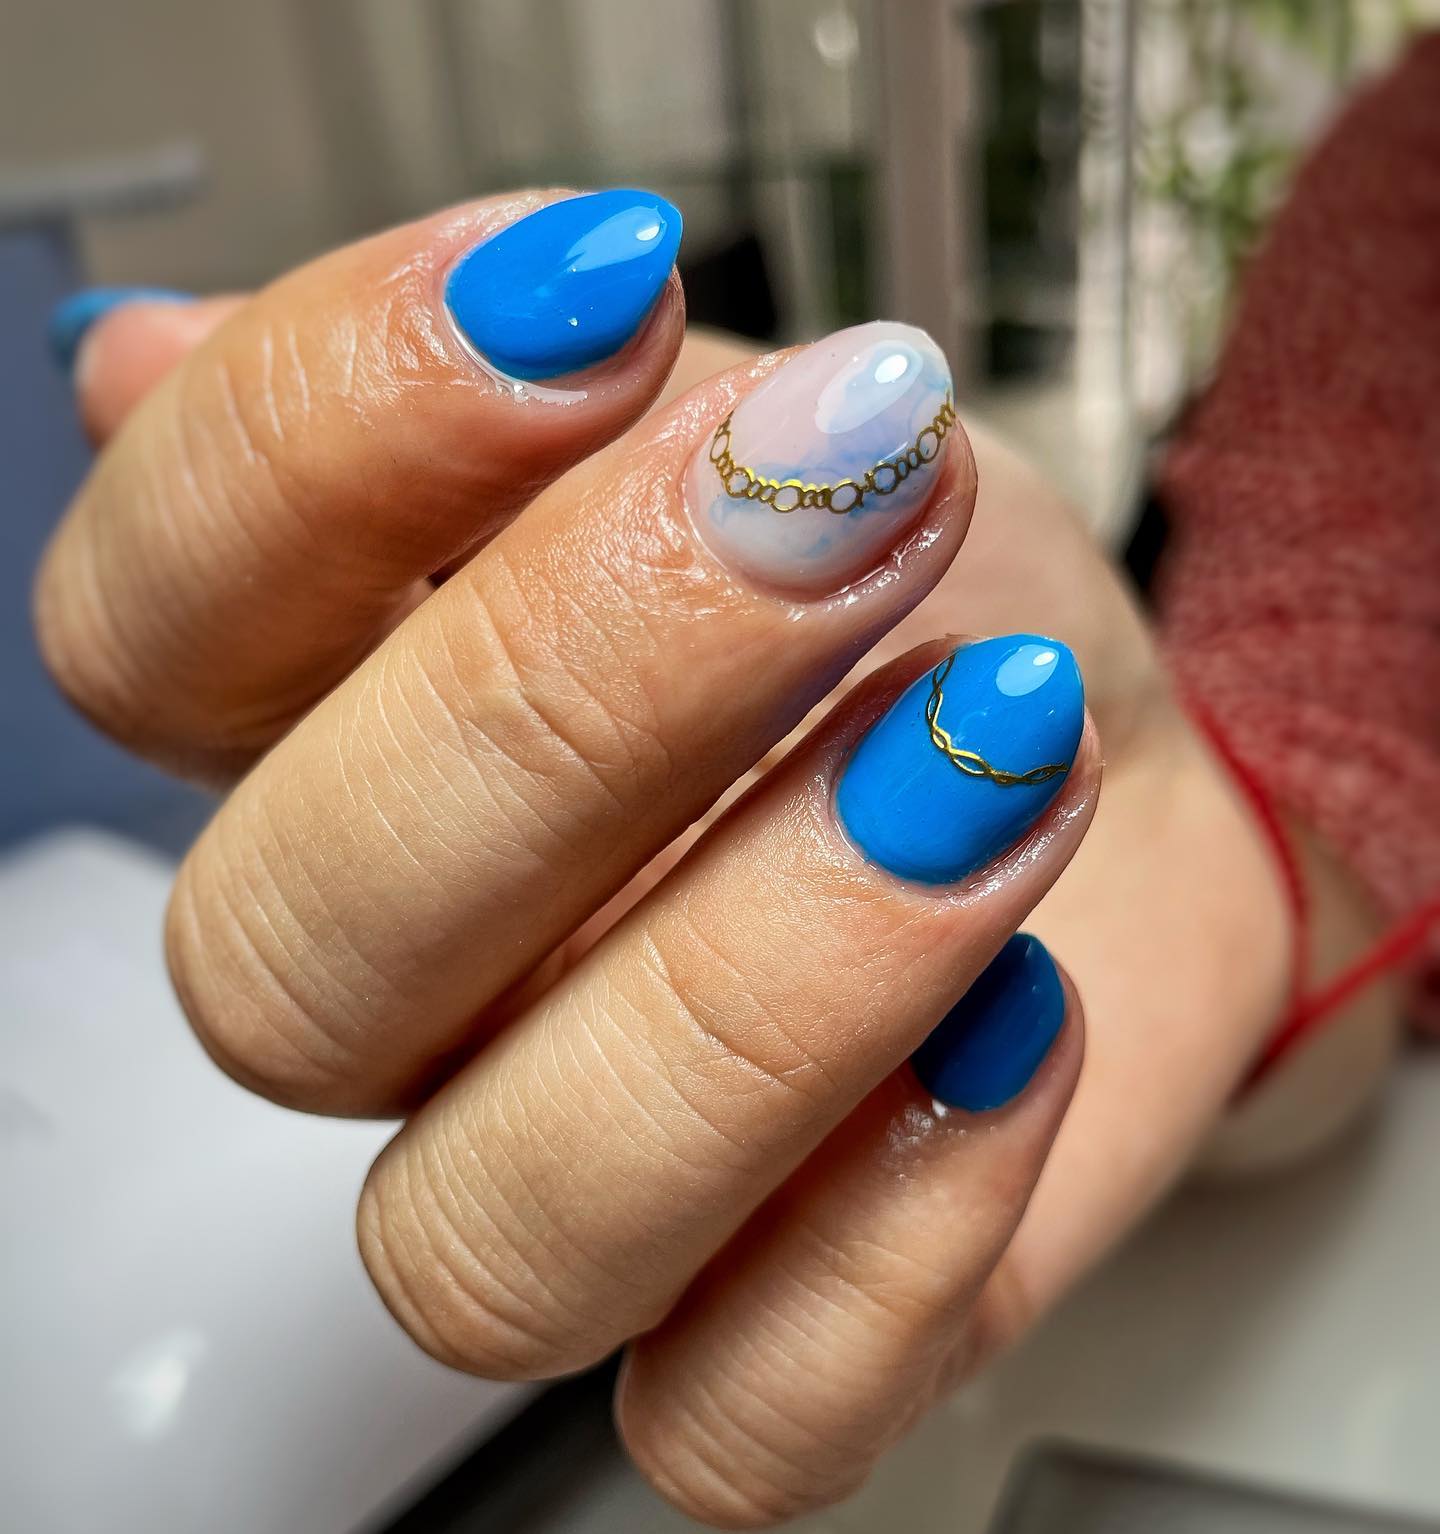 We listed some neon blue nail ideas but this one is really different from others. First, it looks stunning even in short nails and second, these chain-like nail arts give it a great look.